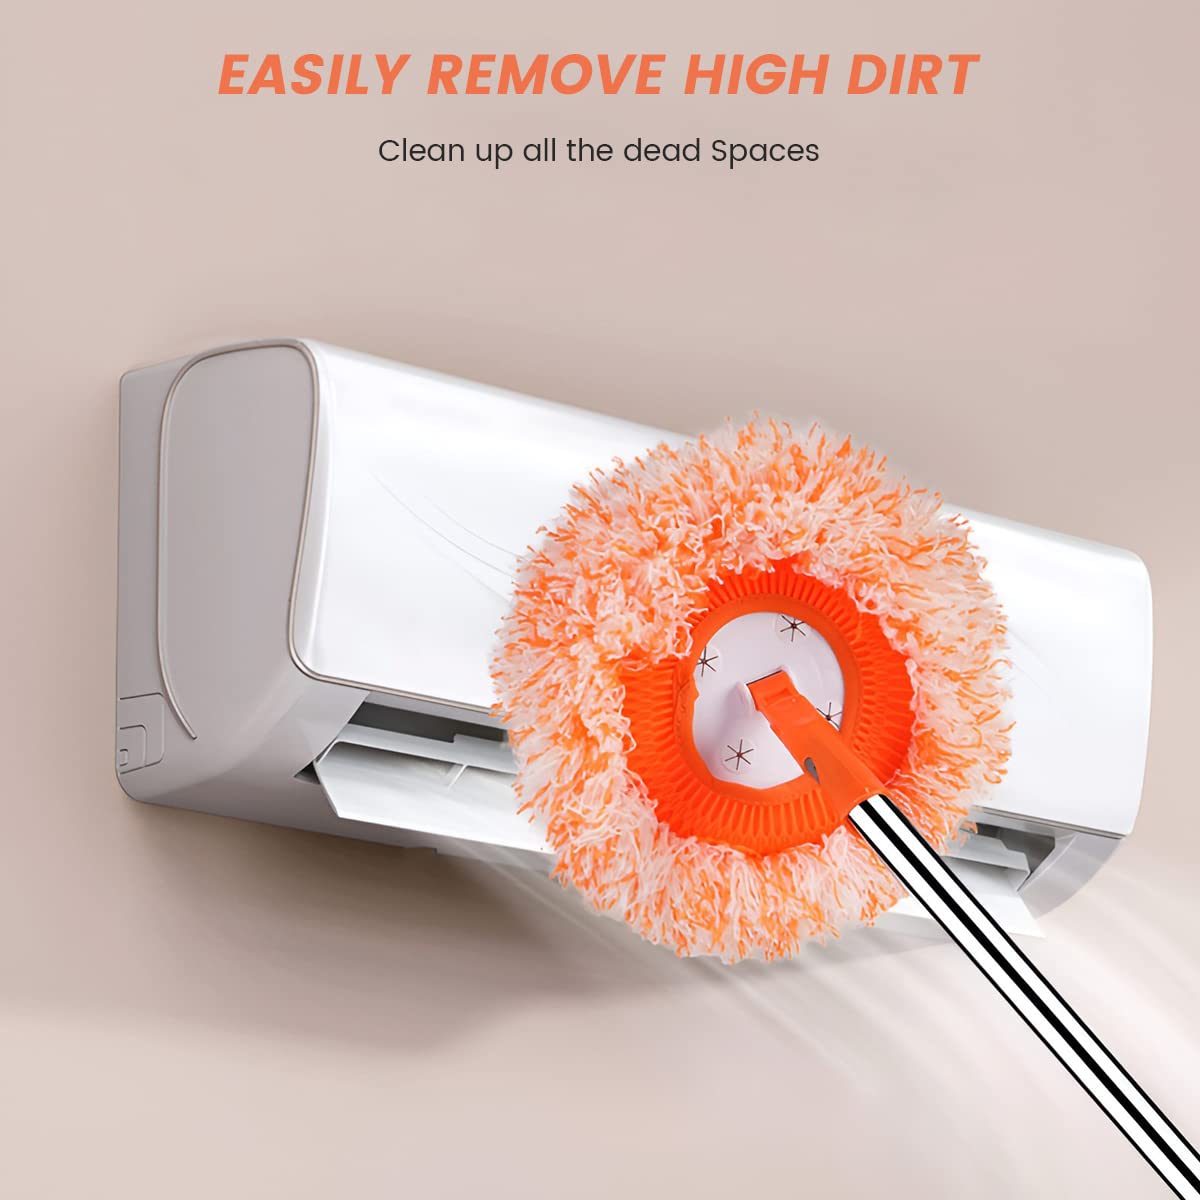 360° Rotatable Adjustable Cleaning Mop with 4 Mop Head, Extendable Wall Cleaning Mop, Spin Mop for Floor Cleaning, Wall Cleaning Bathroom Cleaning Household Supplies